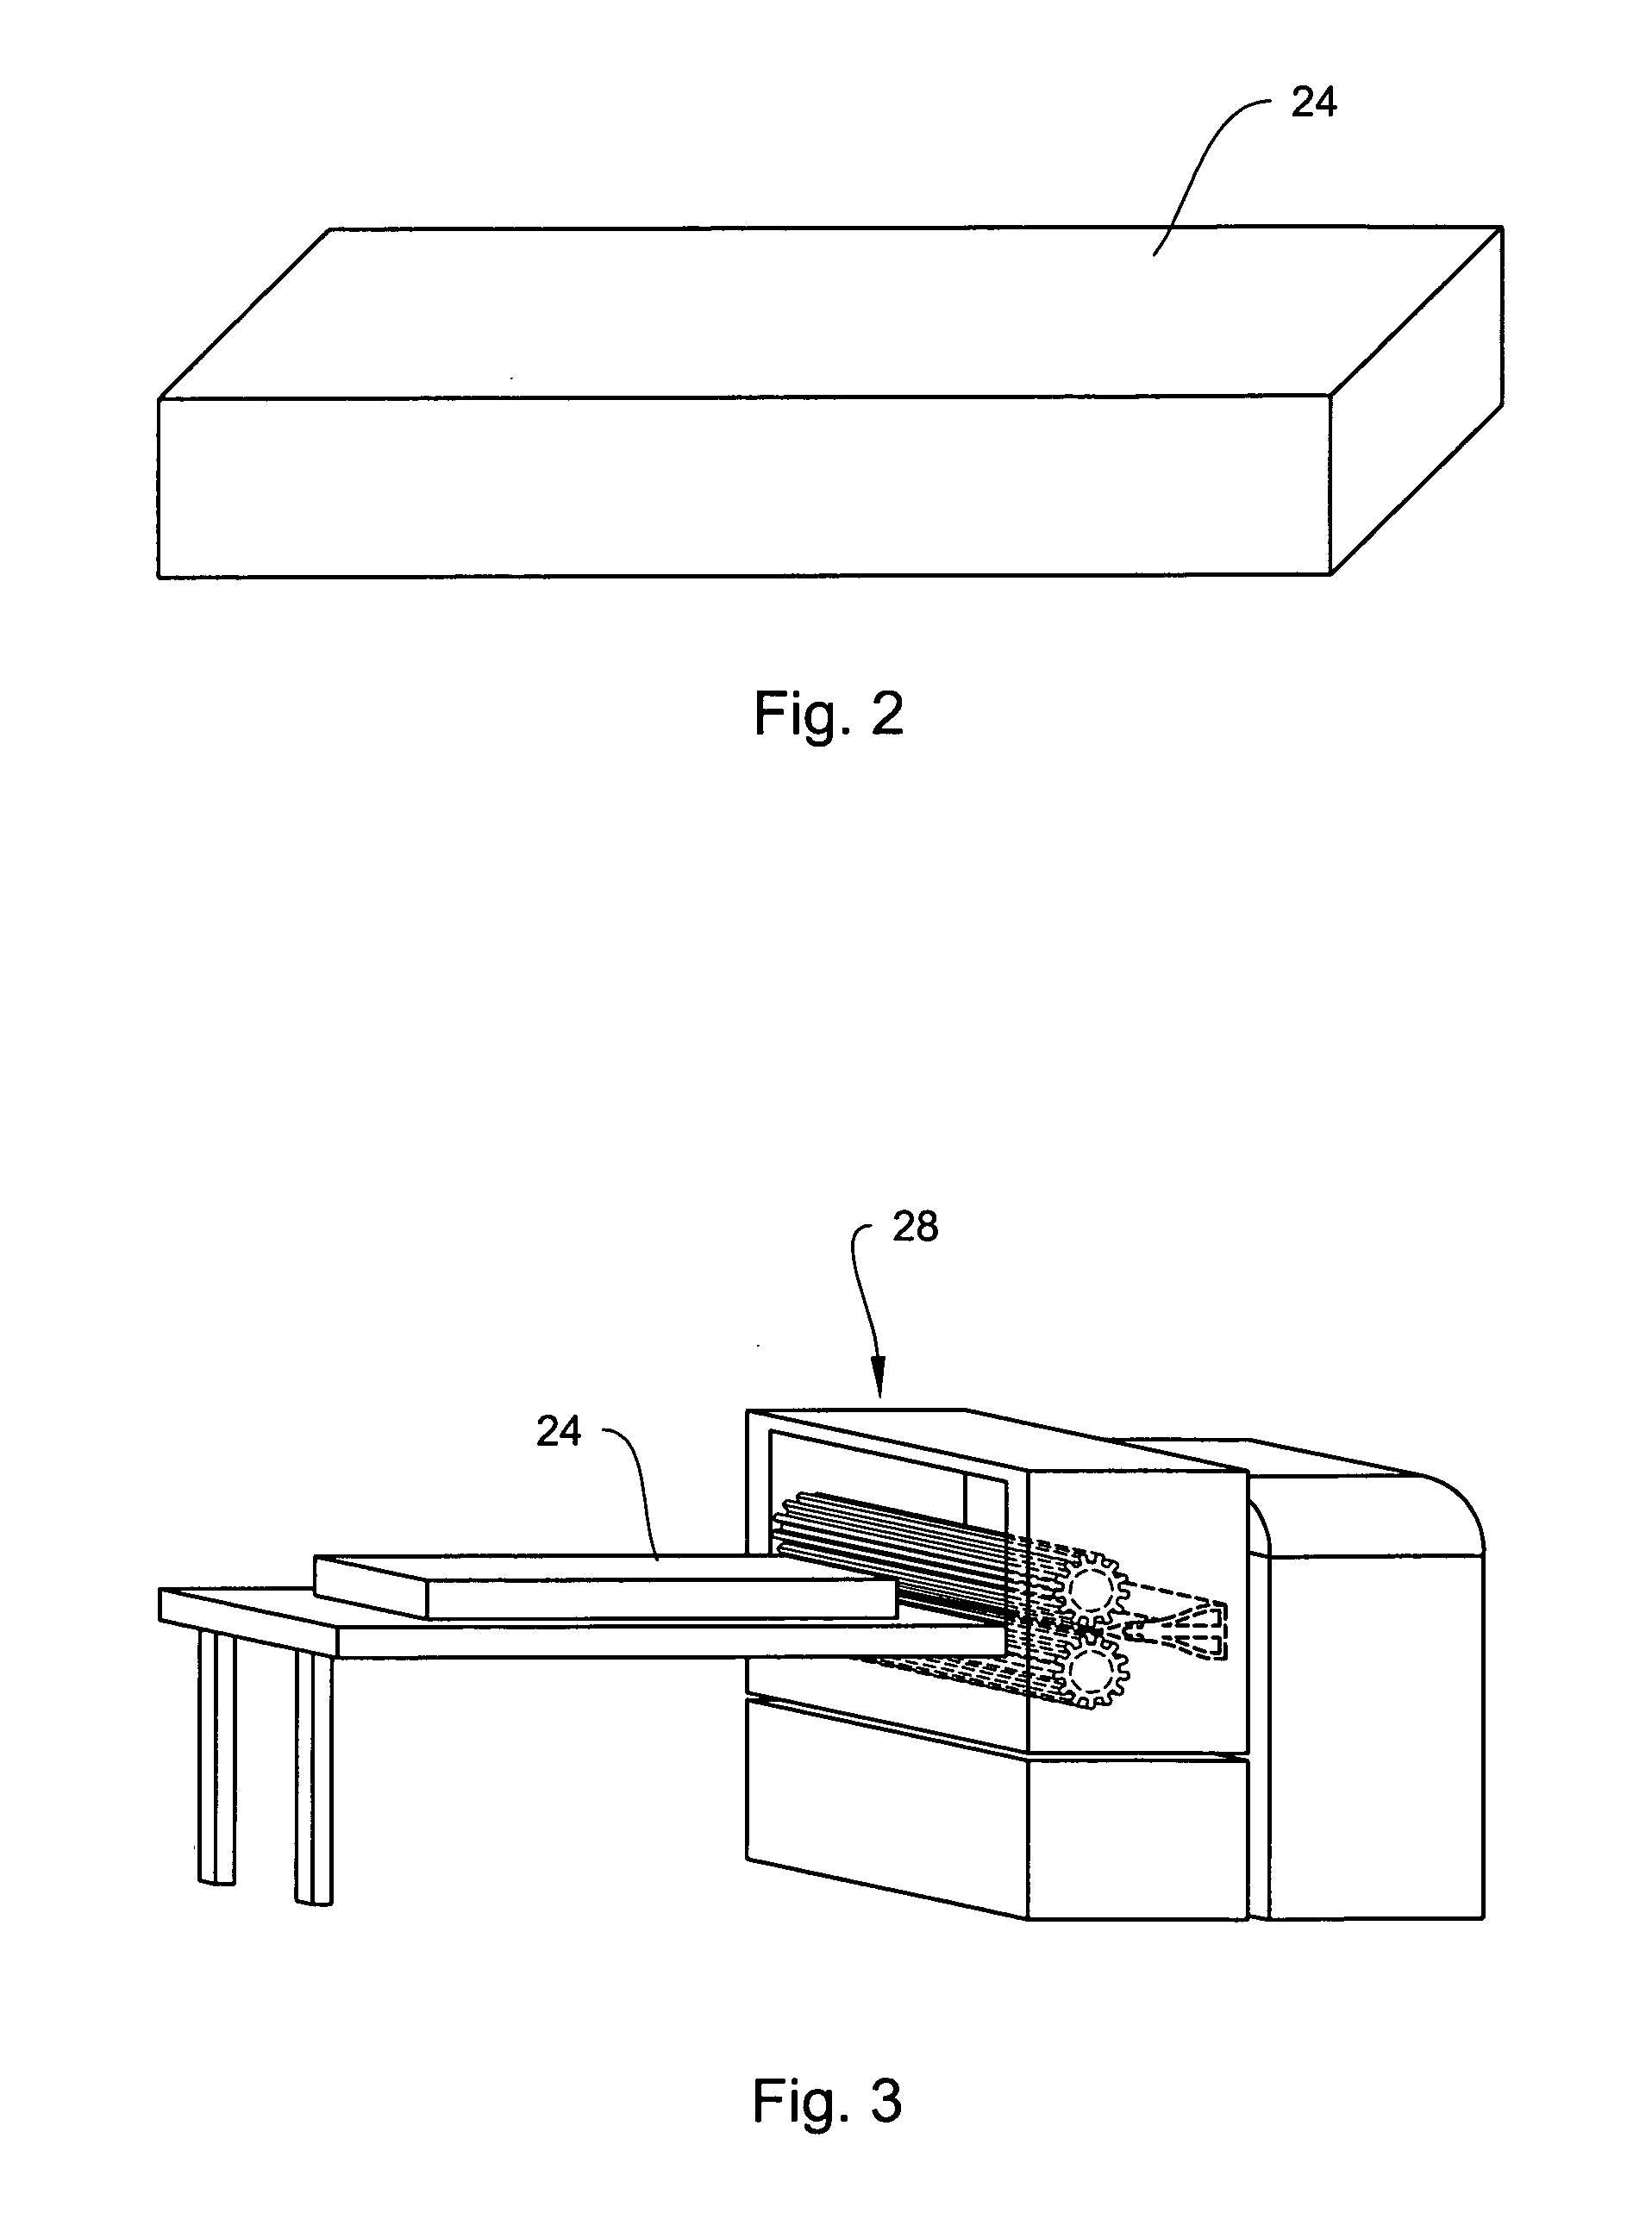 Method for manufacturing a foam core having channel cuts